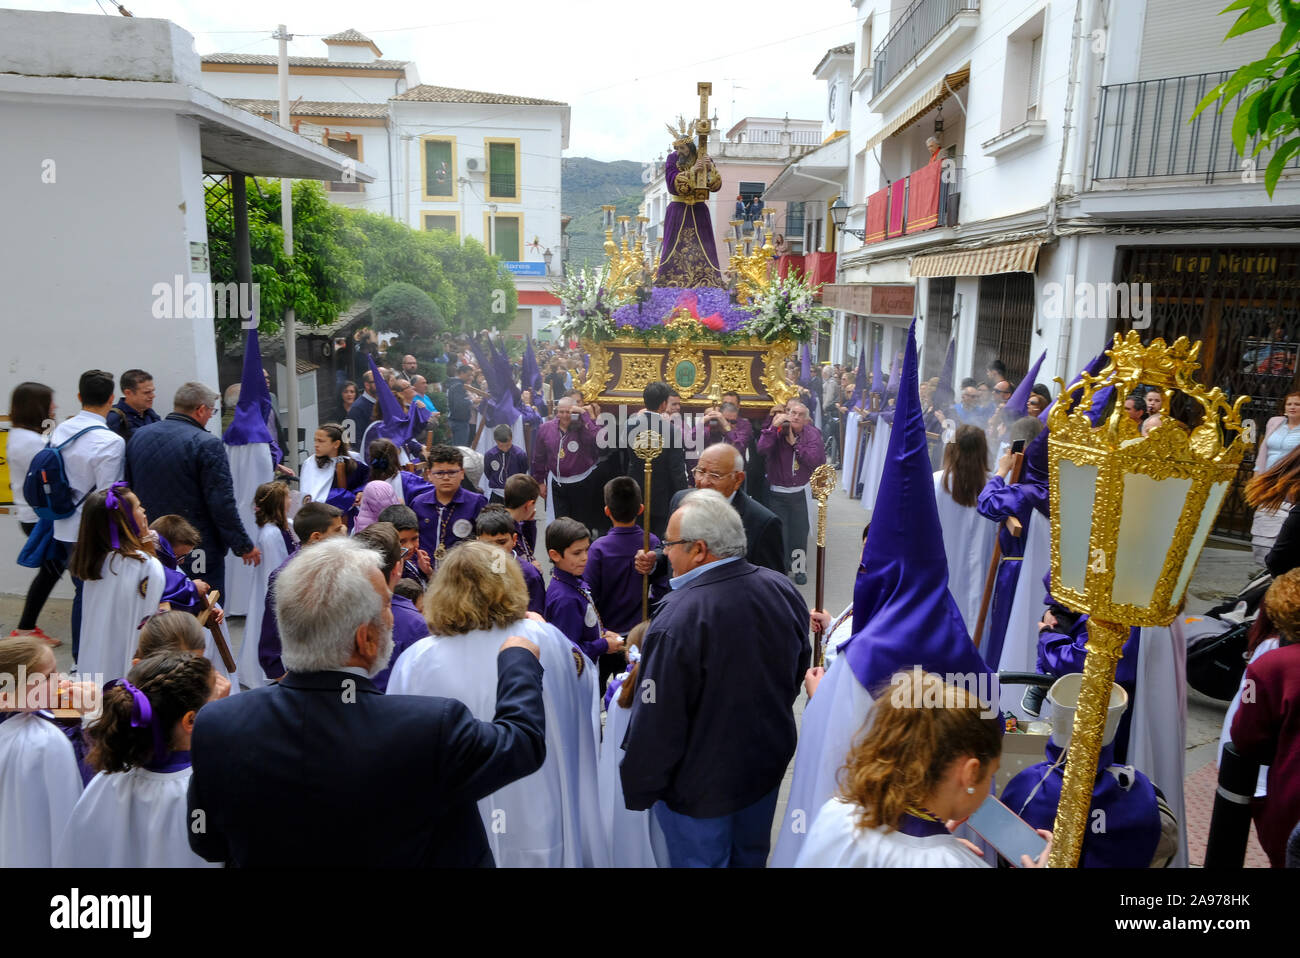 Procession of local community wearing purple capirotes, bearing Jesus and the Cross during Holy Week. Carcabuey, Cordoba Province, Andalucia. Spain Stock Photo